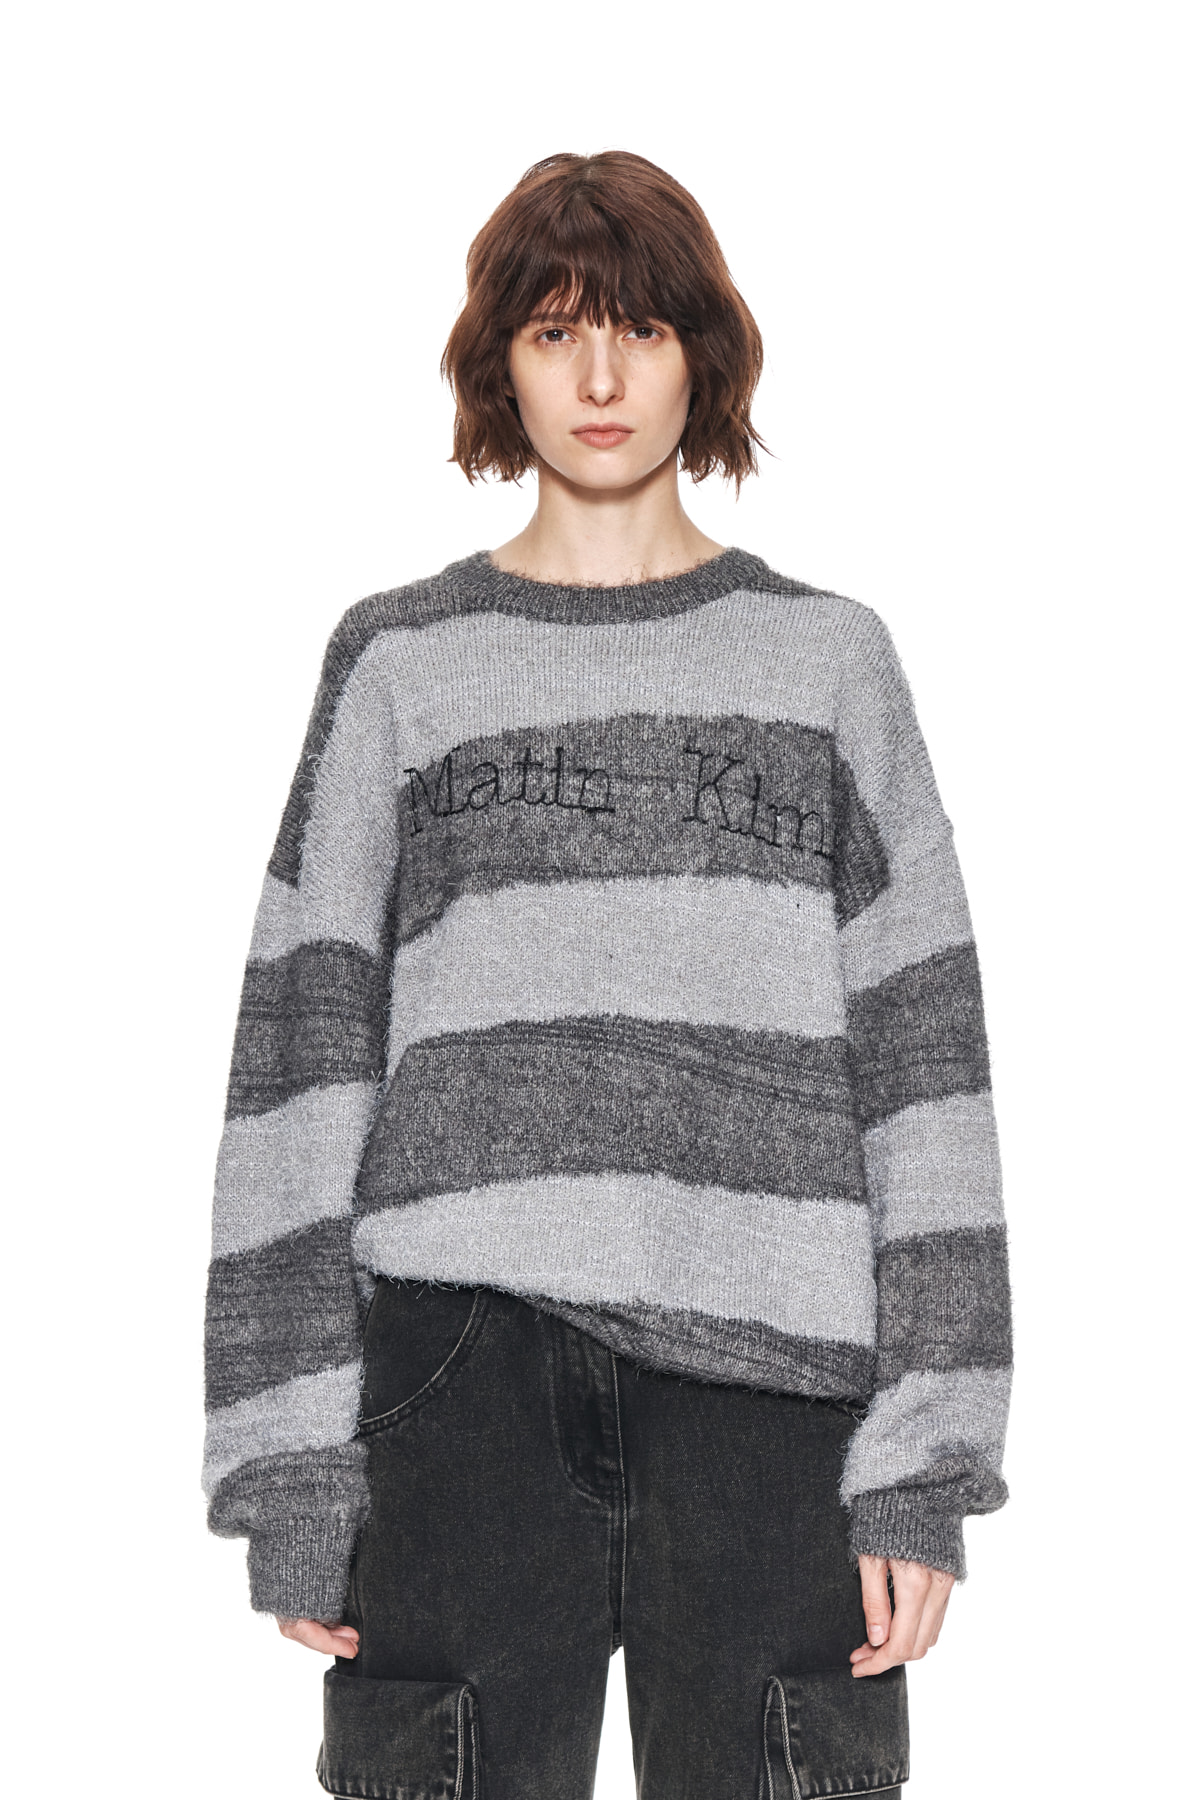 STRIPE SNOWBALL KNIT PULLOVER IN CHARCOAL